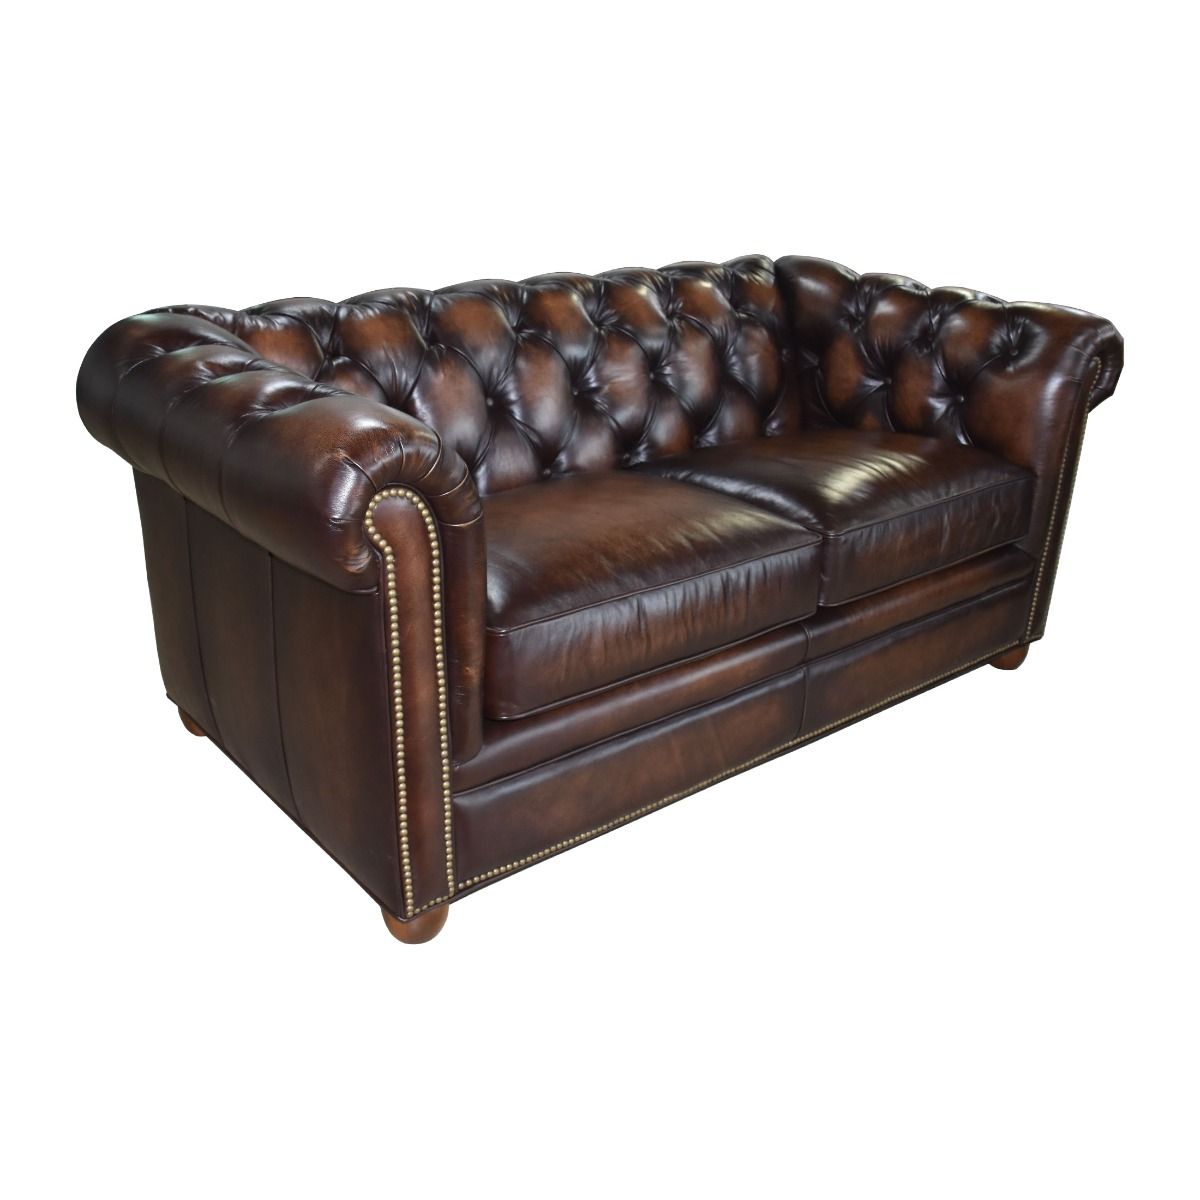 London Chesterfield 2 Seater